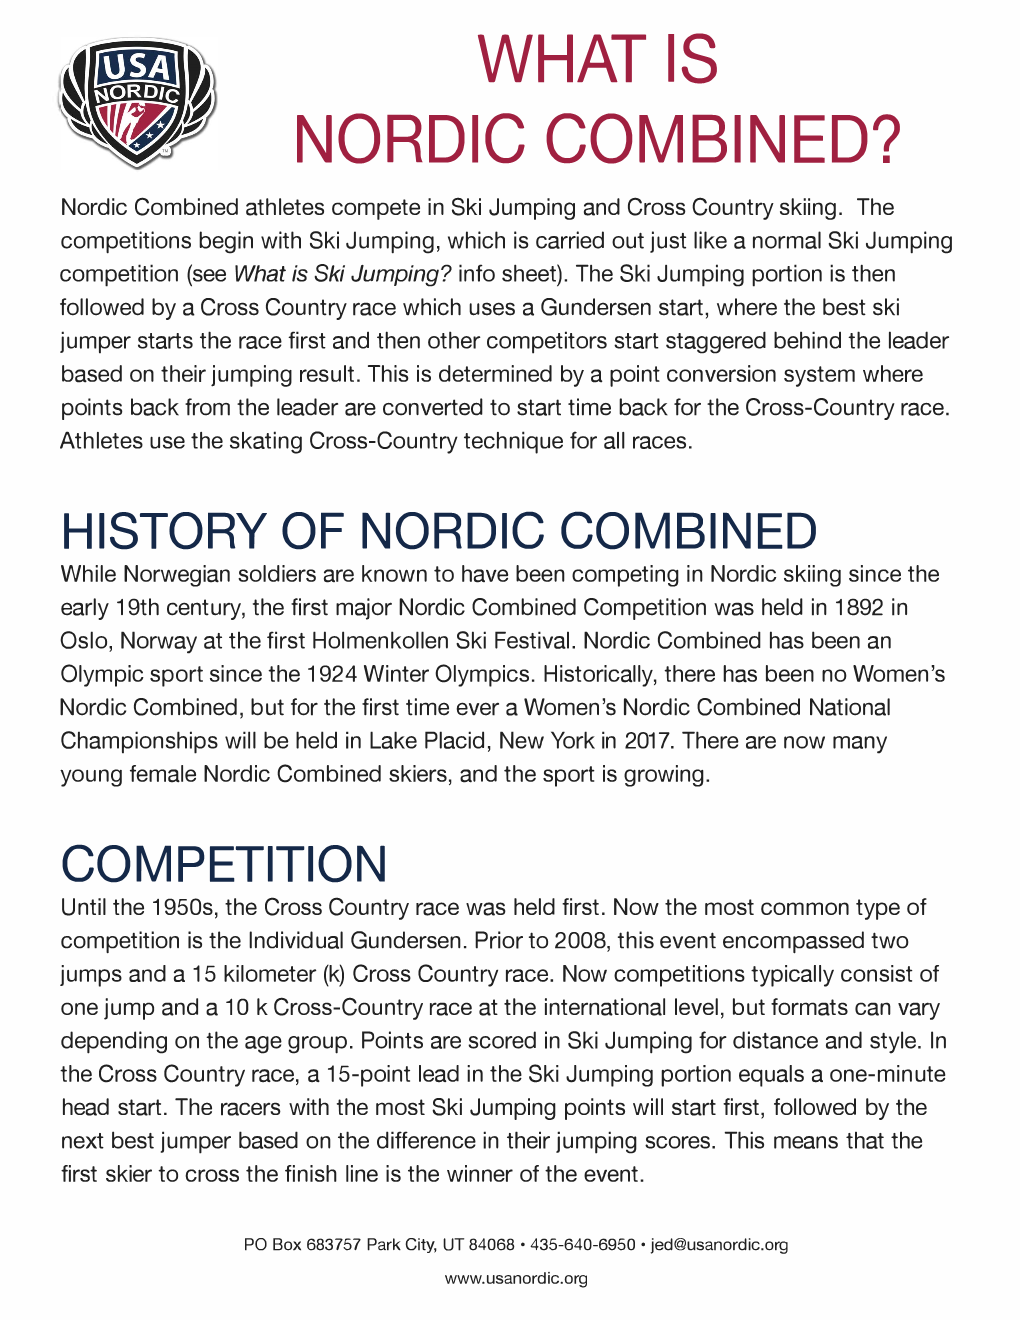 WHAT IS NORDIC COMBINED? Nordic Combined Athletes Compete in Ski Jumping and Cross Country Skiing